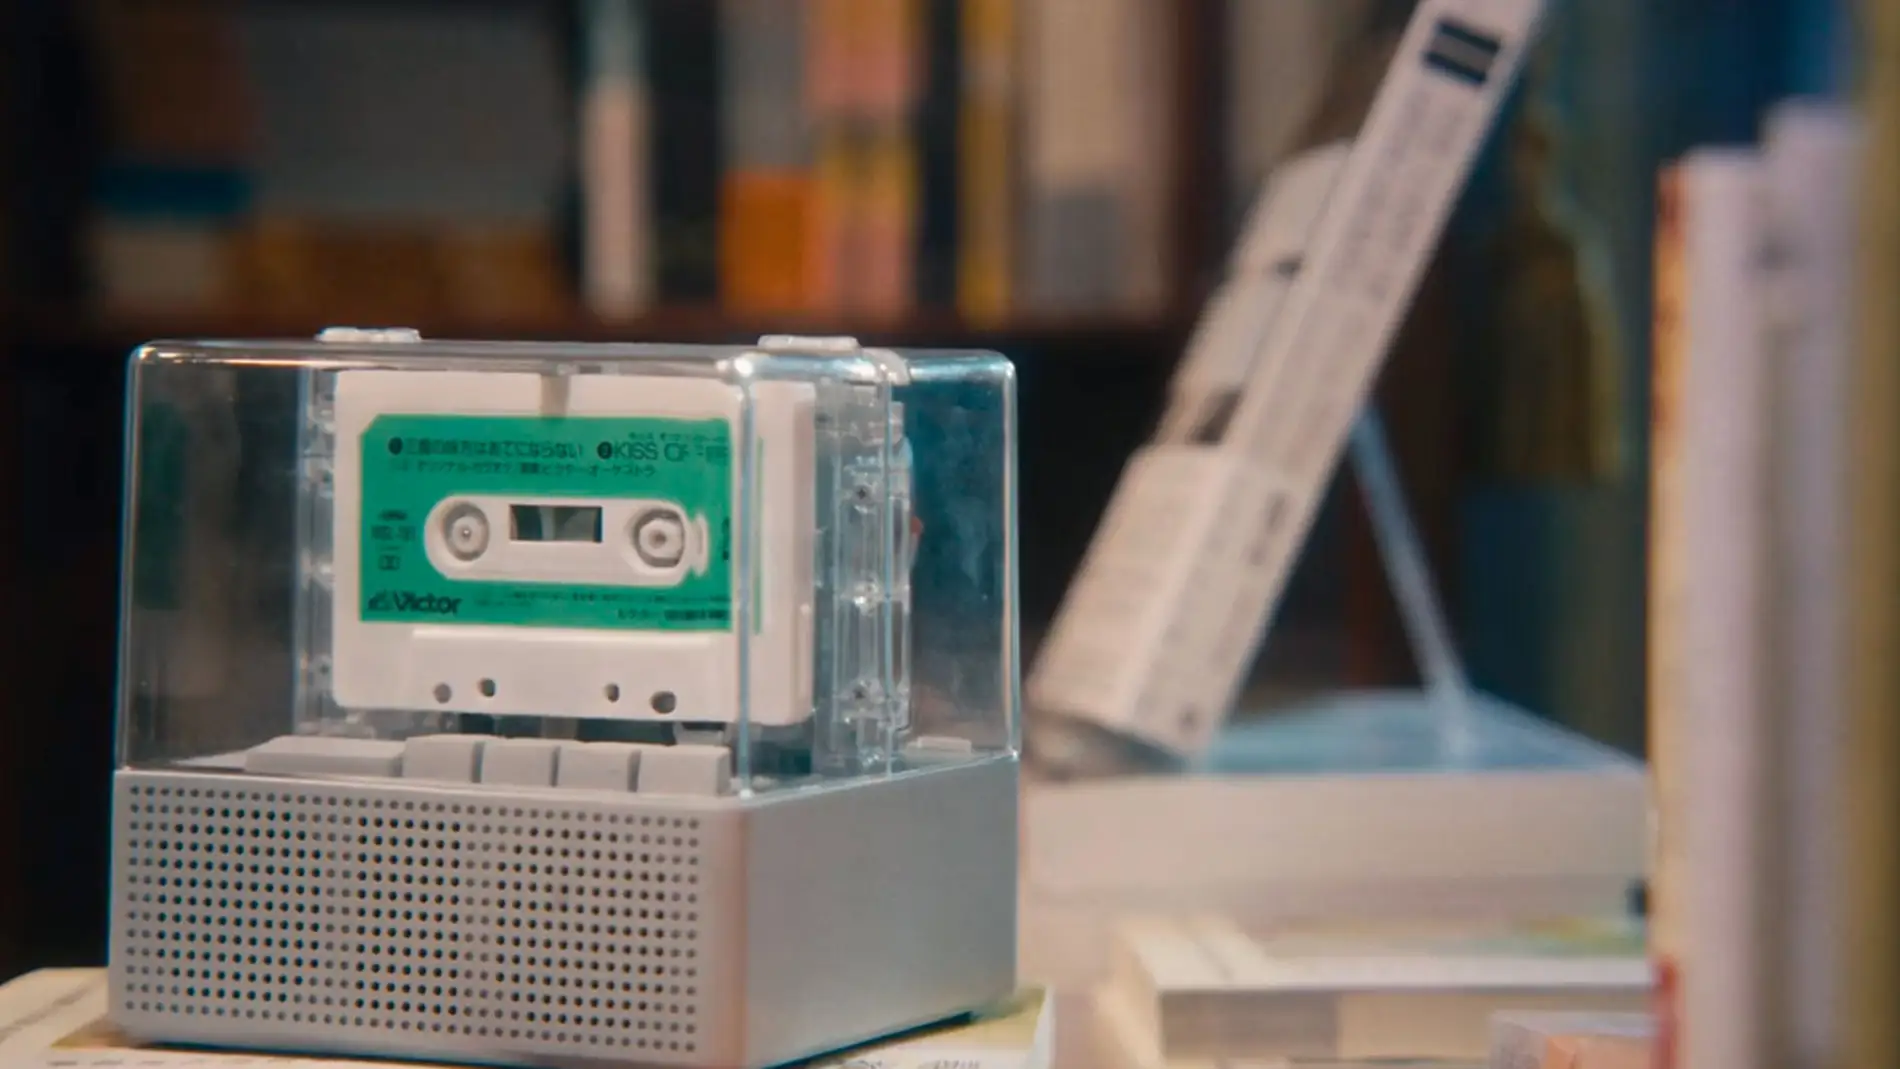  IT’S REAL Bluetooth Speaker + Cassette Player Combo